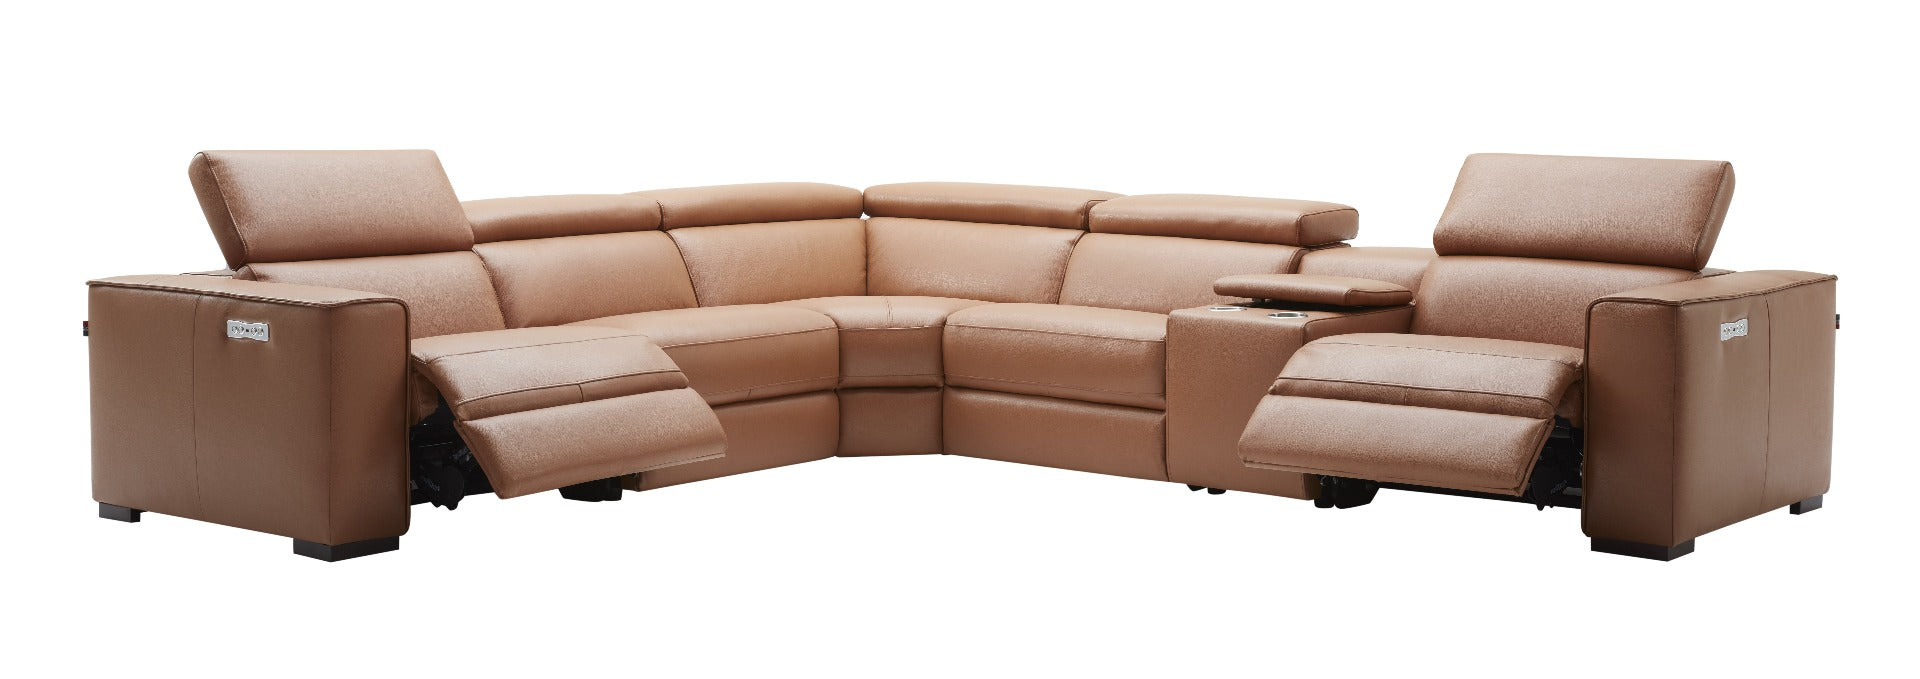 J&M Furniture - Picasso Motion Sectional in Caramel - 18865-C